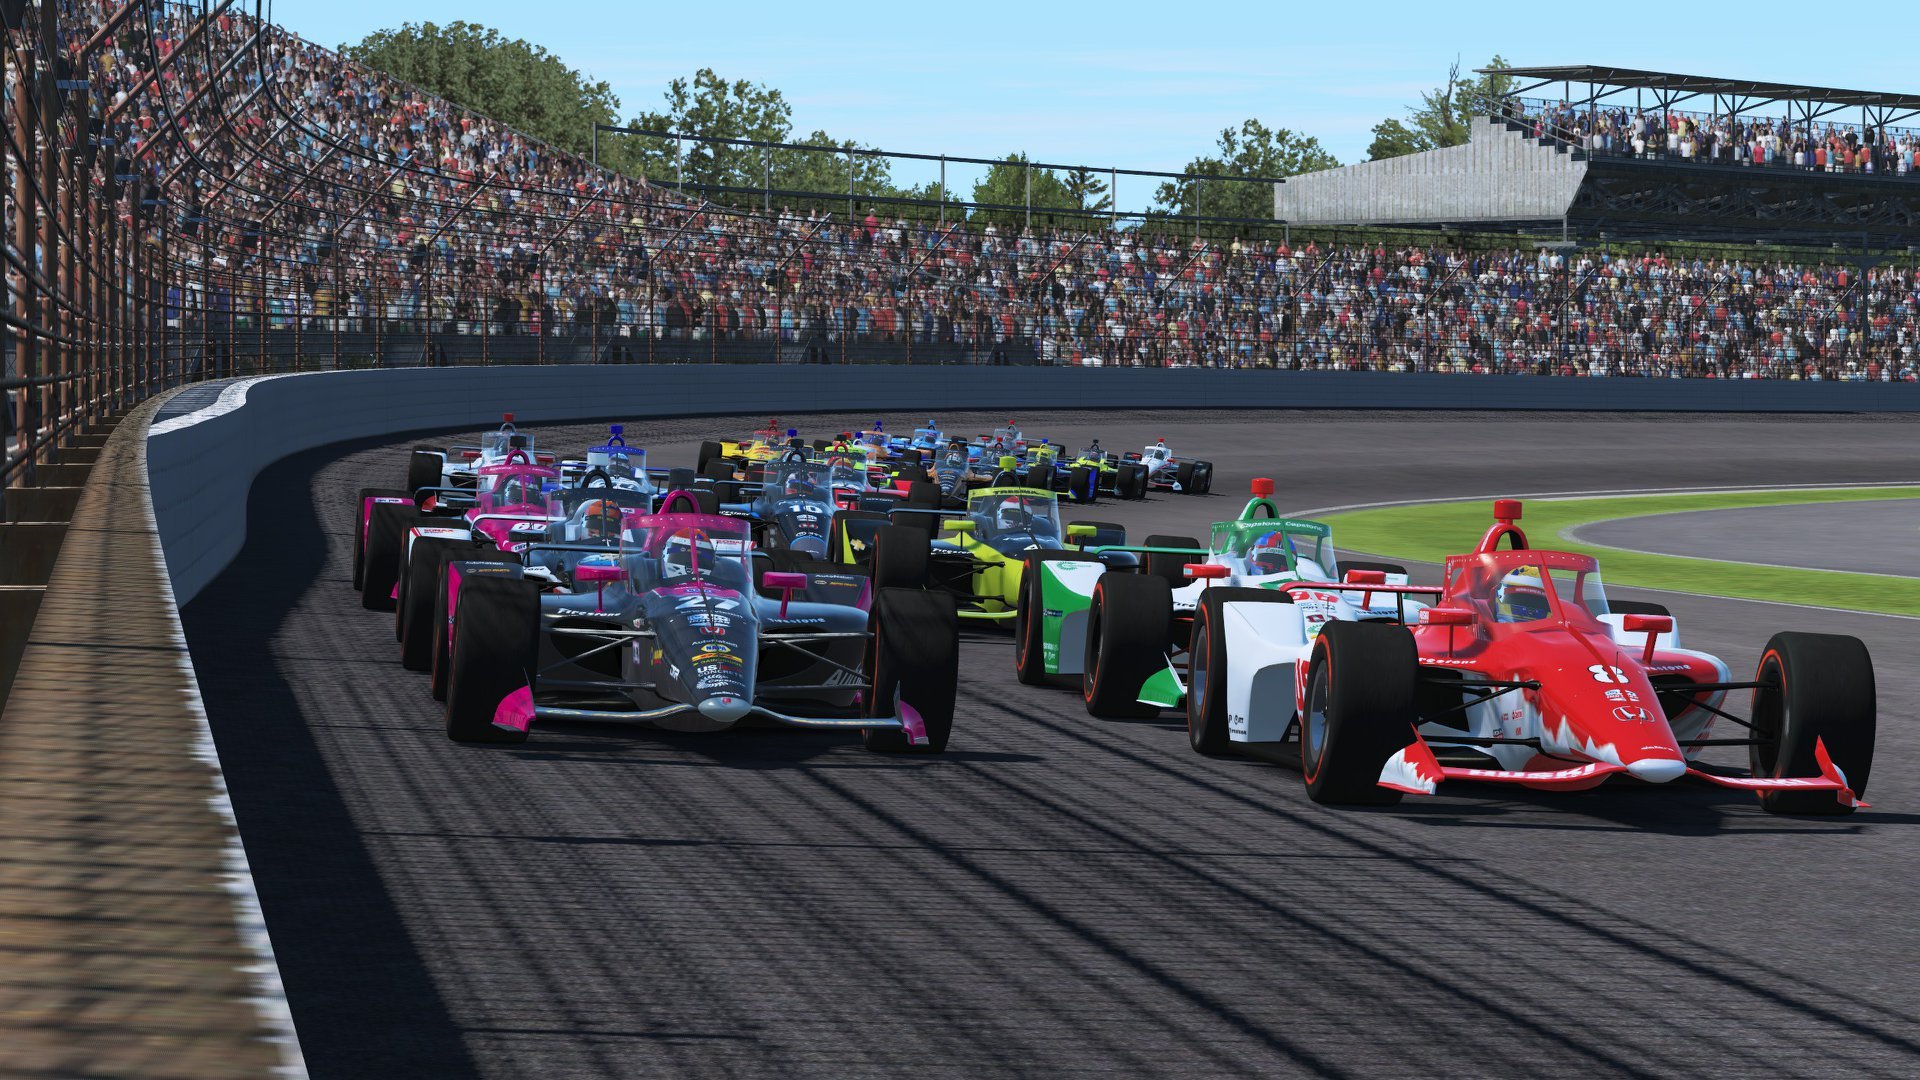 More information about "rFactor 2: NTT IndyCar Series 2020 by Remy group & Apex Modding"